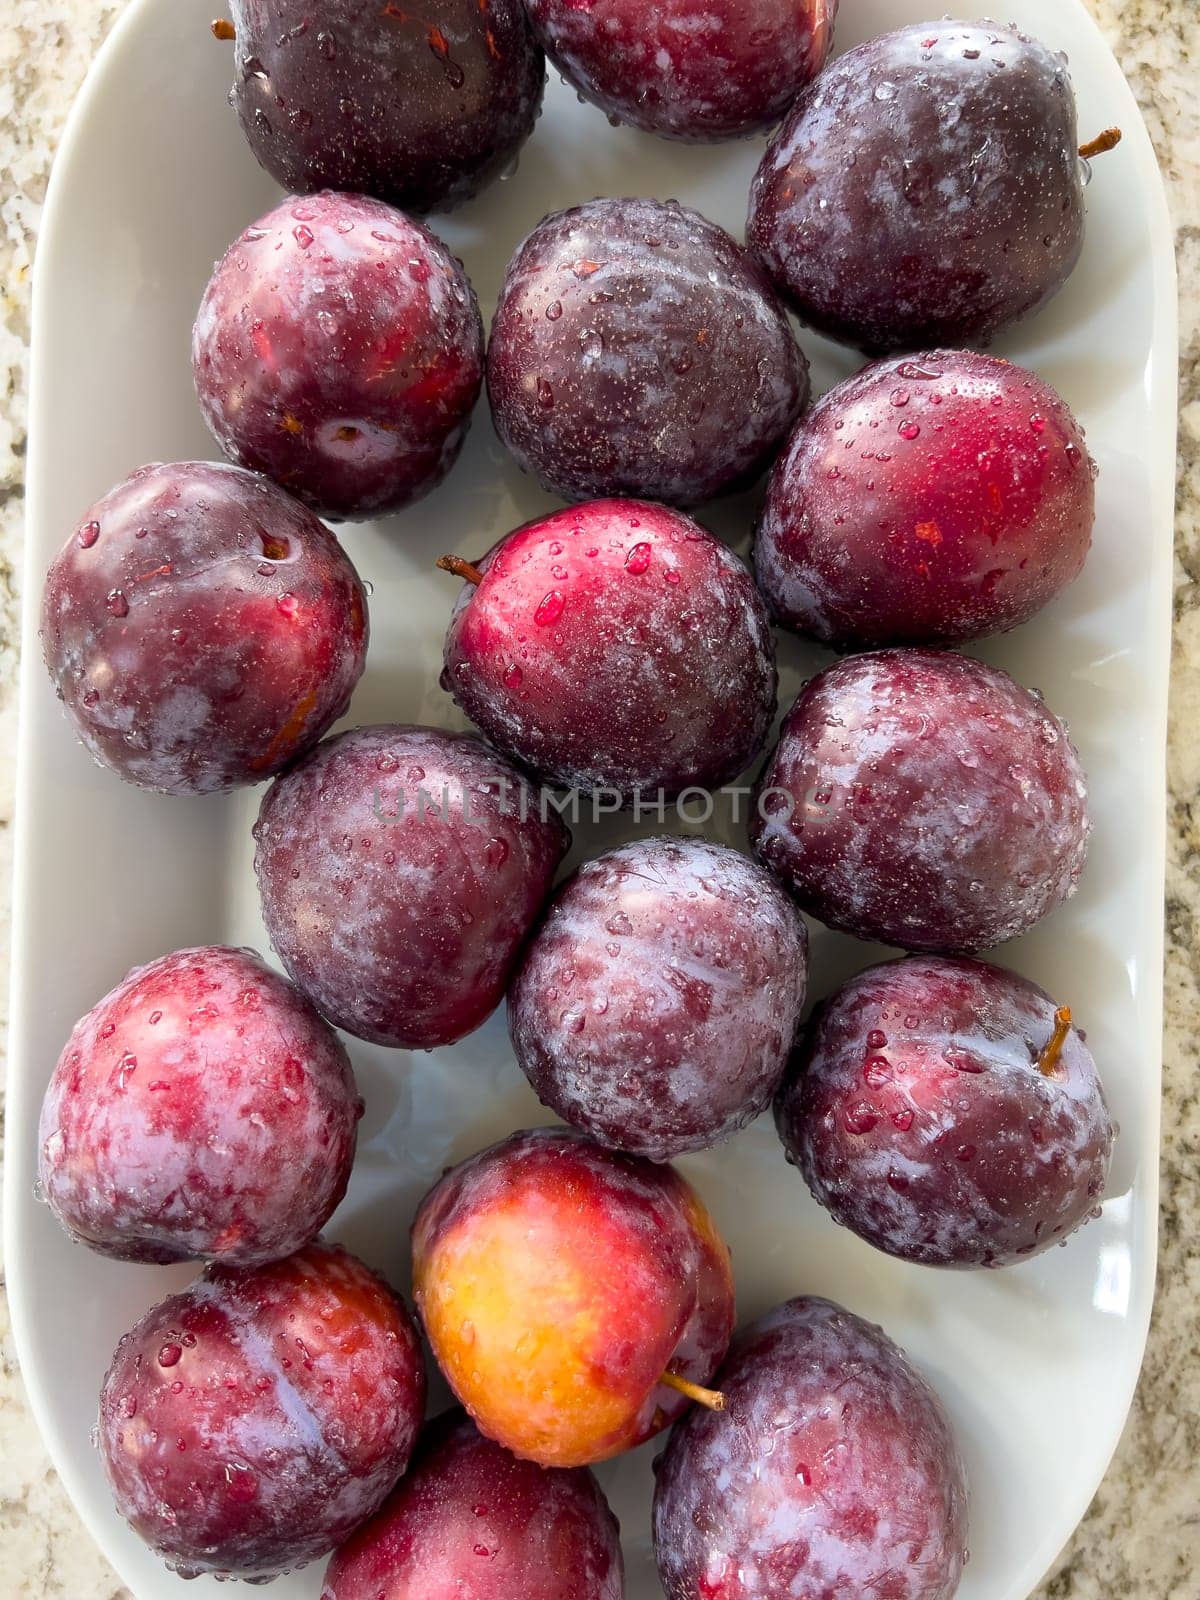 Fresh Plums on a Plate in a Bright Modern Kitchen Setting by arinahabich